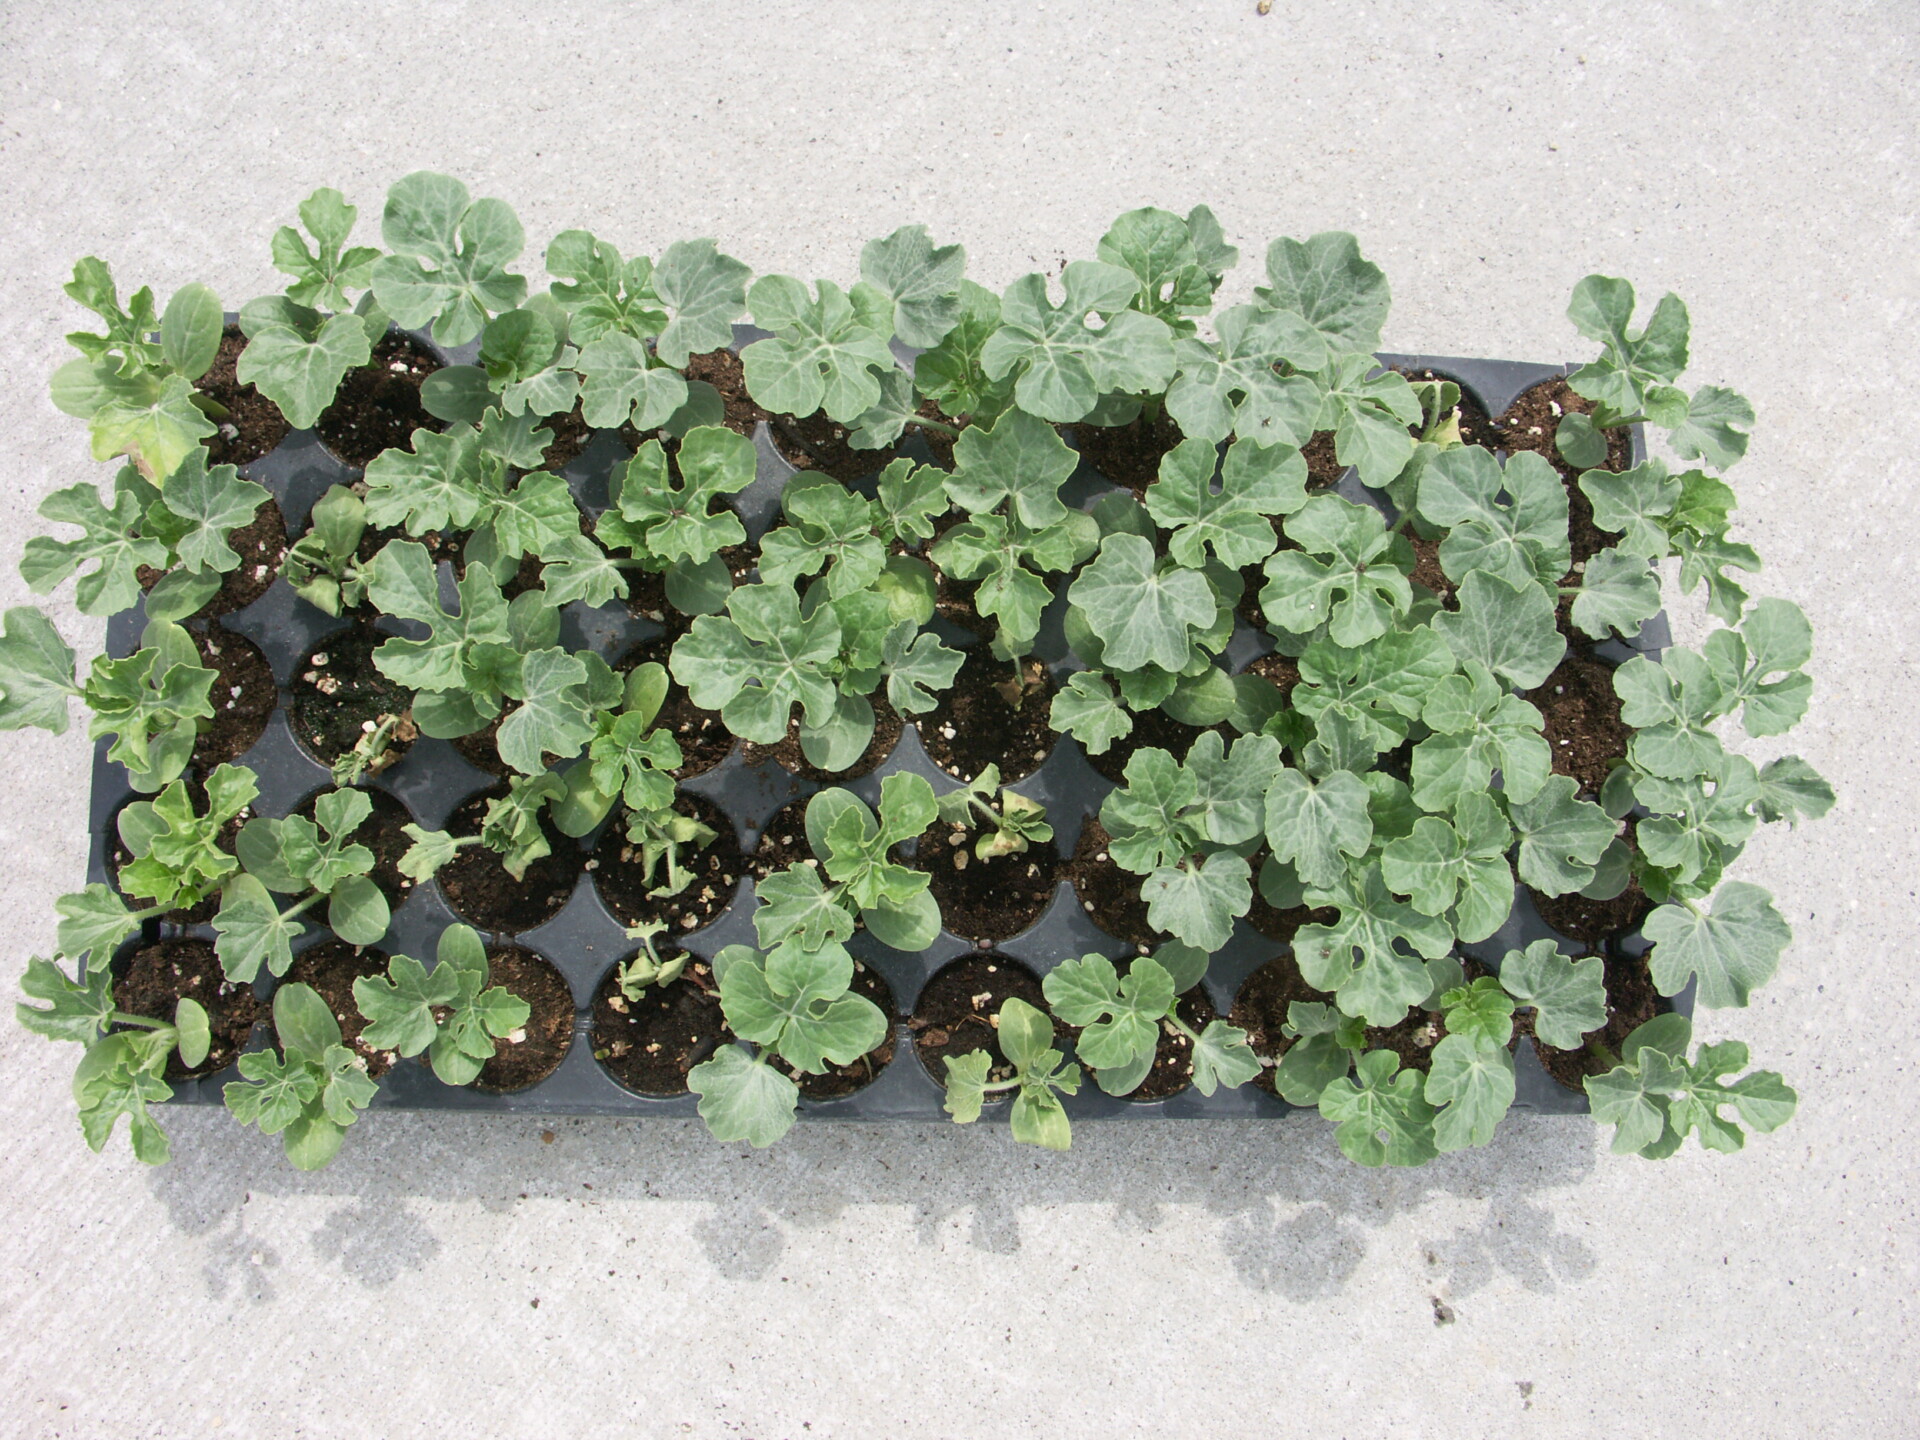 Figure 6. Seedling distribution of Fusarium wilt in watermelon may be randomly distributed in transplant trays.